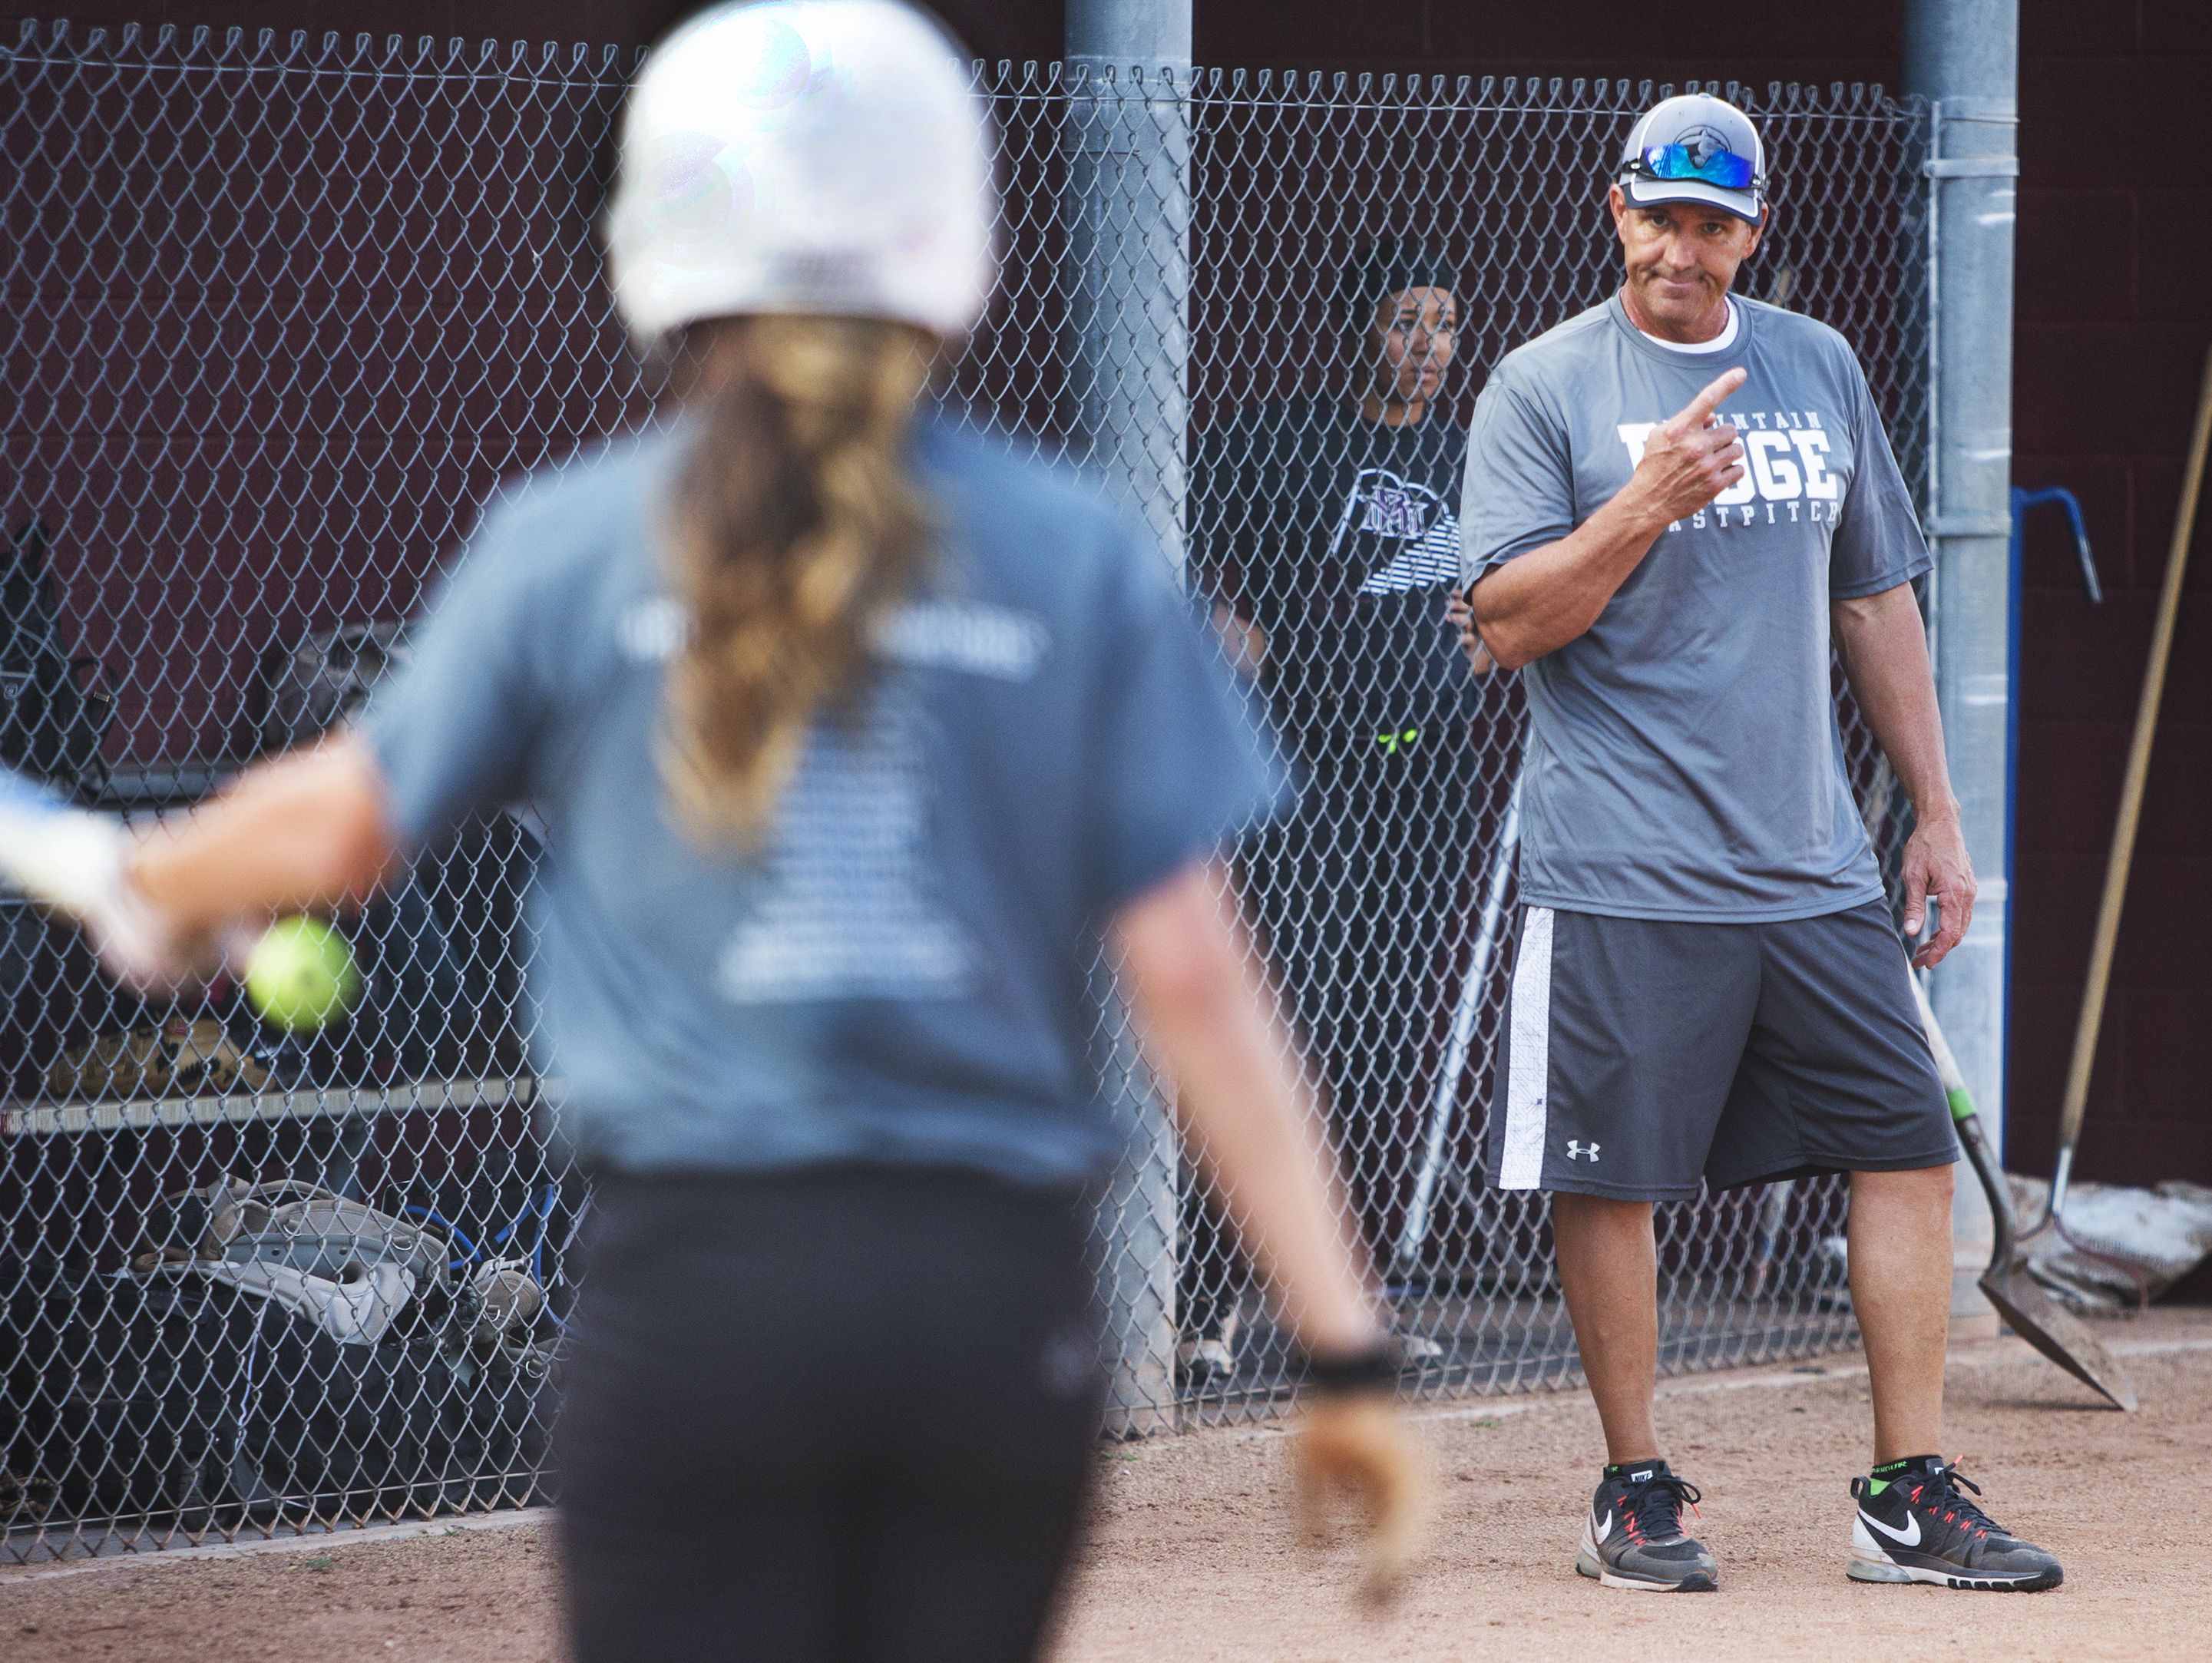 Kent Decker, the softball coach for Mountain Ridge High School in Glendale, got a lot of help and support from members of his team while battling throat cancer. He coaches the team, Monday, February 13, 2017.